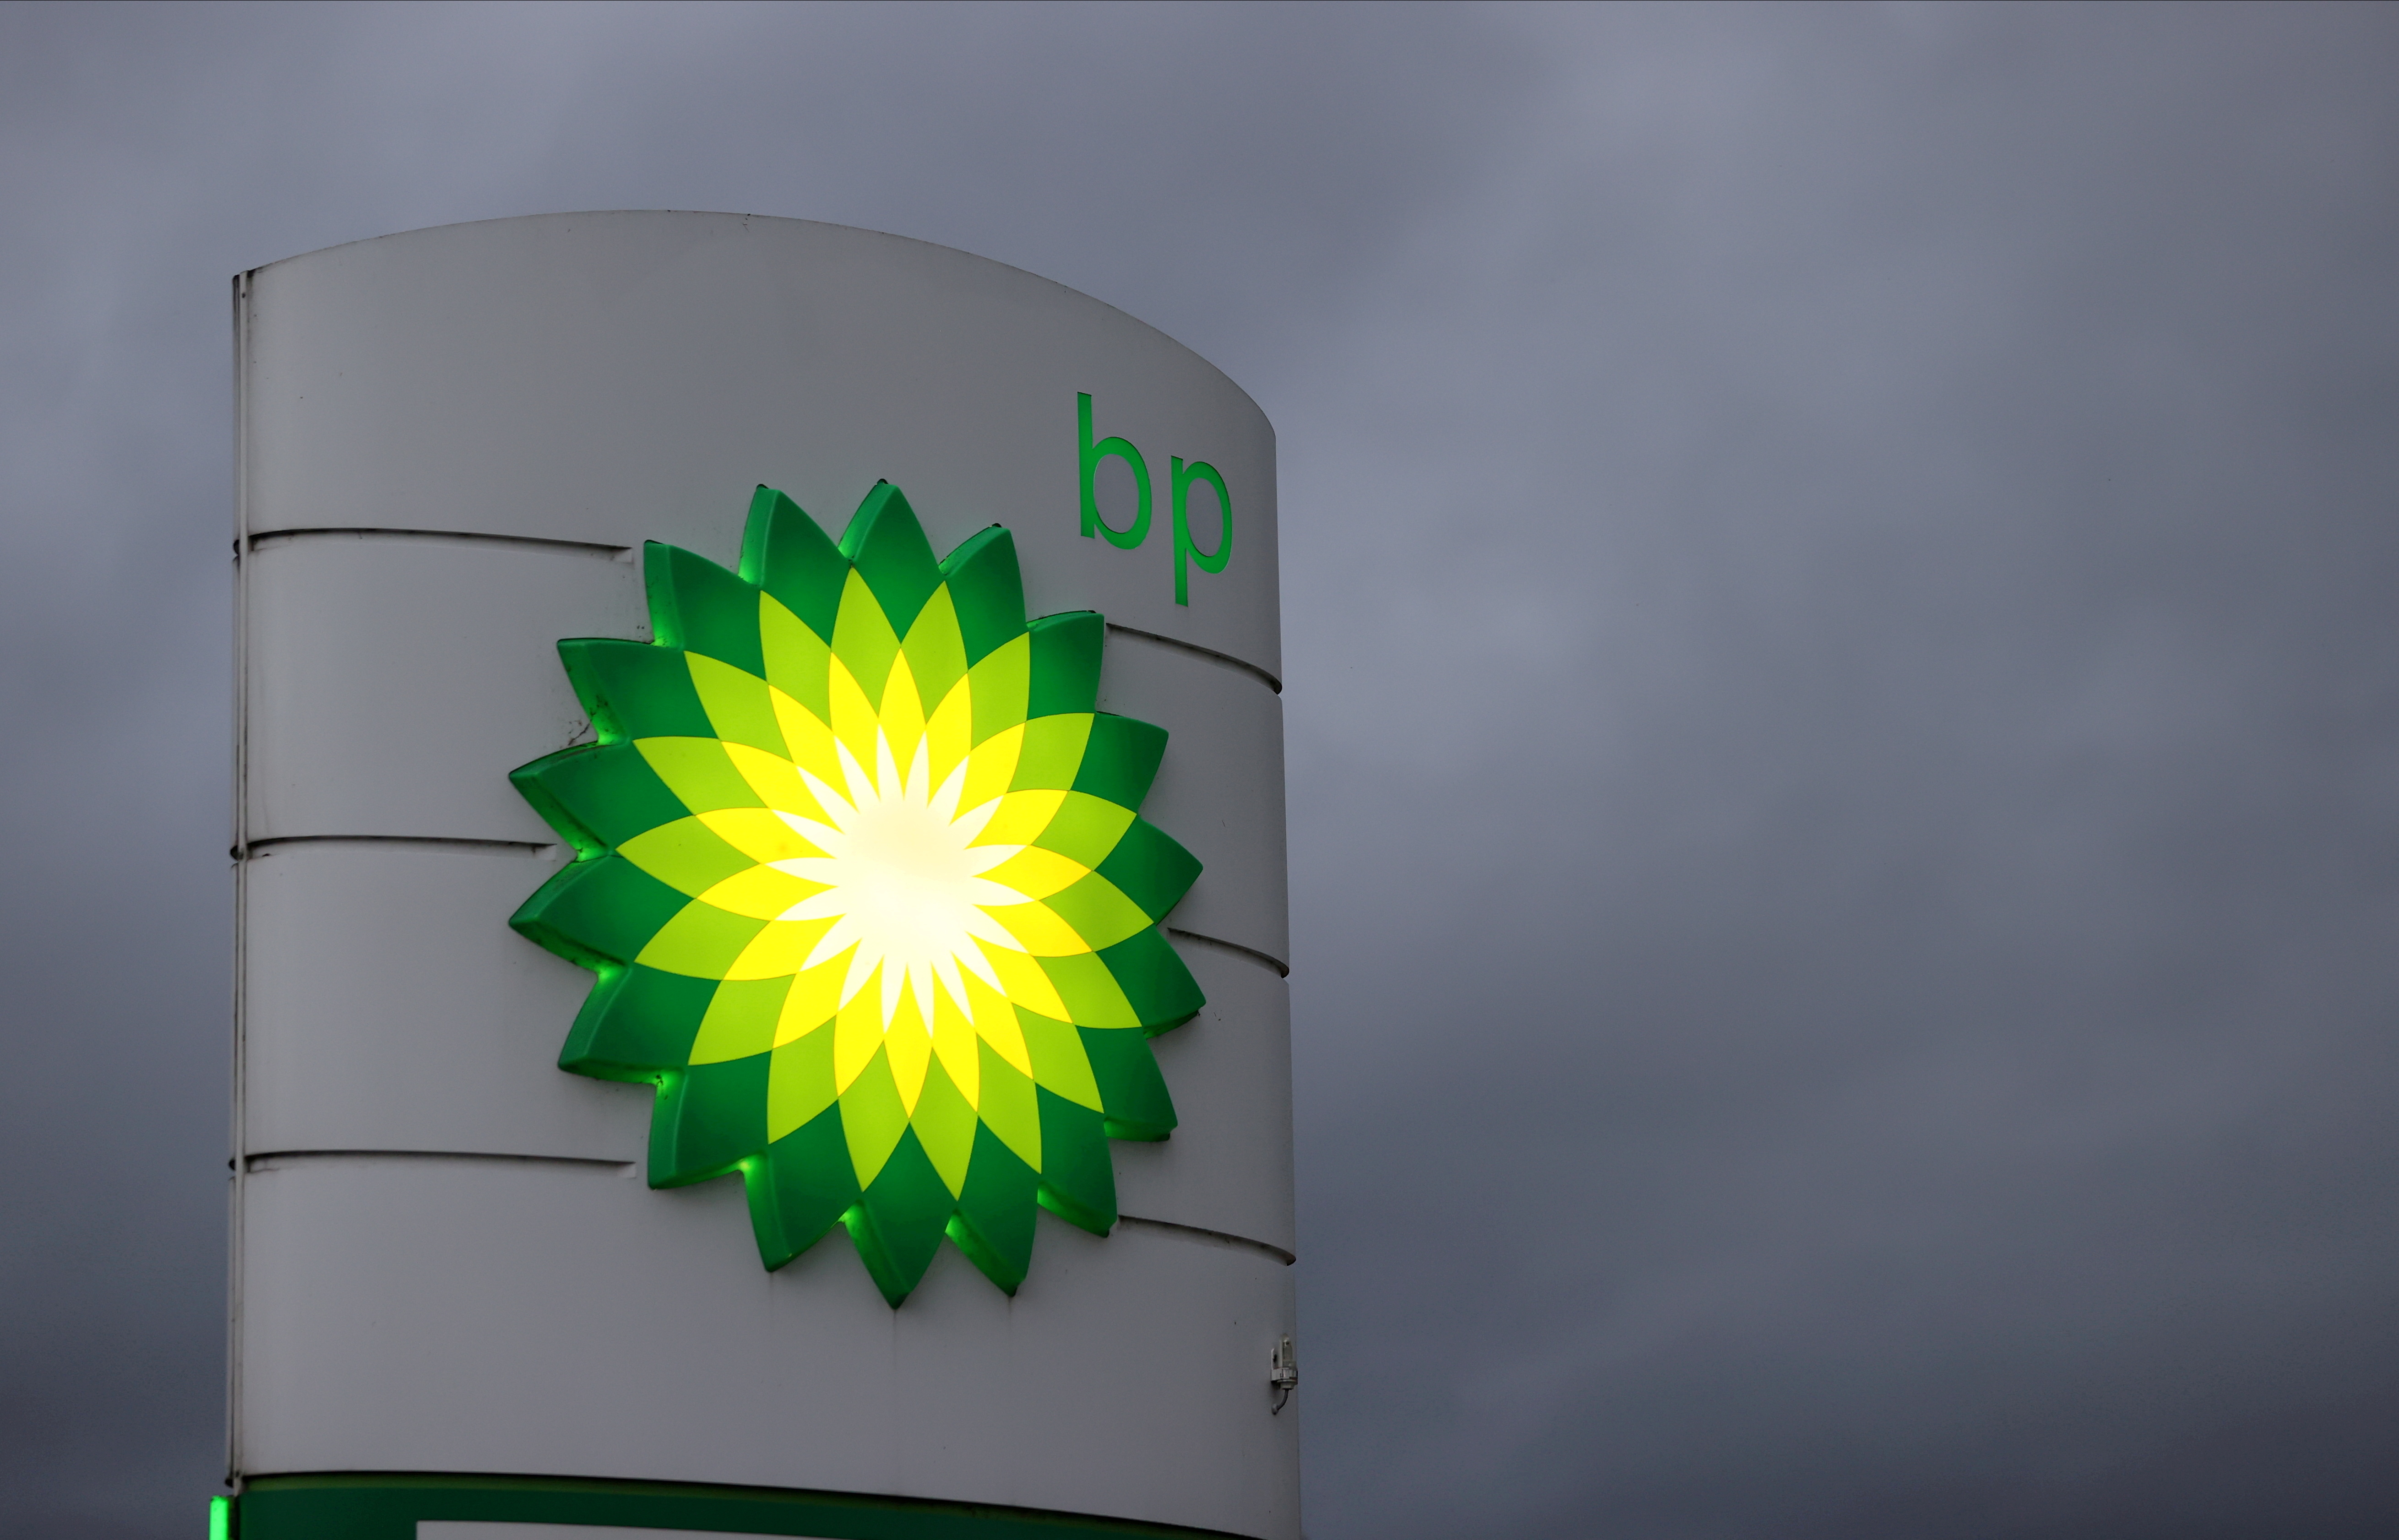 An illuminated BP logo is seen at a petrol station in Gateshead, Britain September 23, 2021. REUTERS/Lee Smith/File Photo